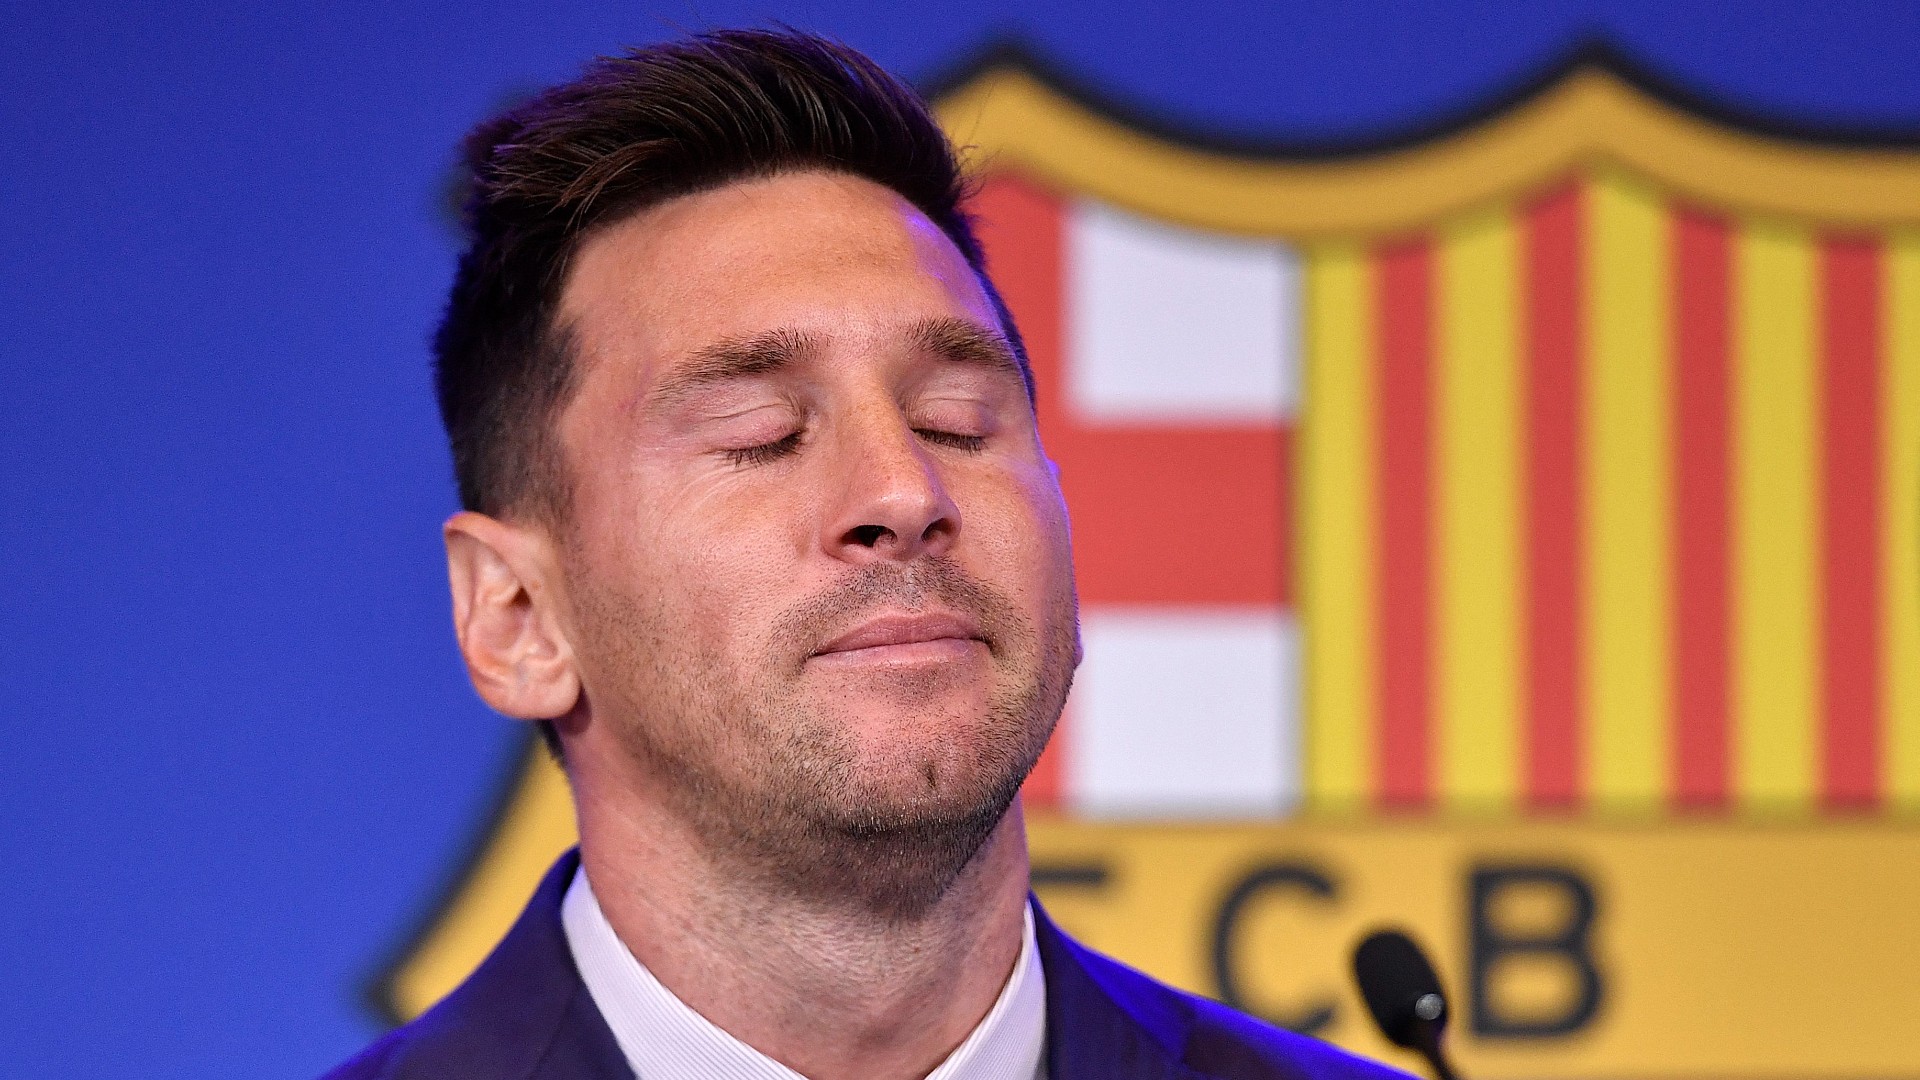 Messi 'hurt' by Laporta comments as PSG star insists he was never asked to play for Barcelona for free